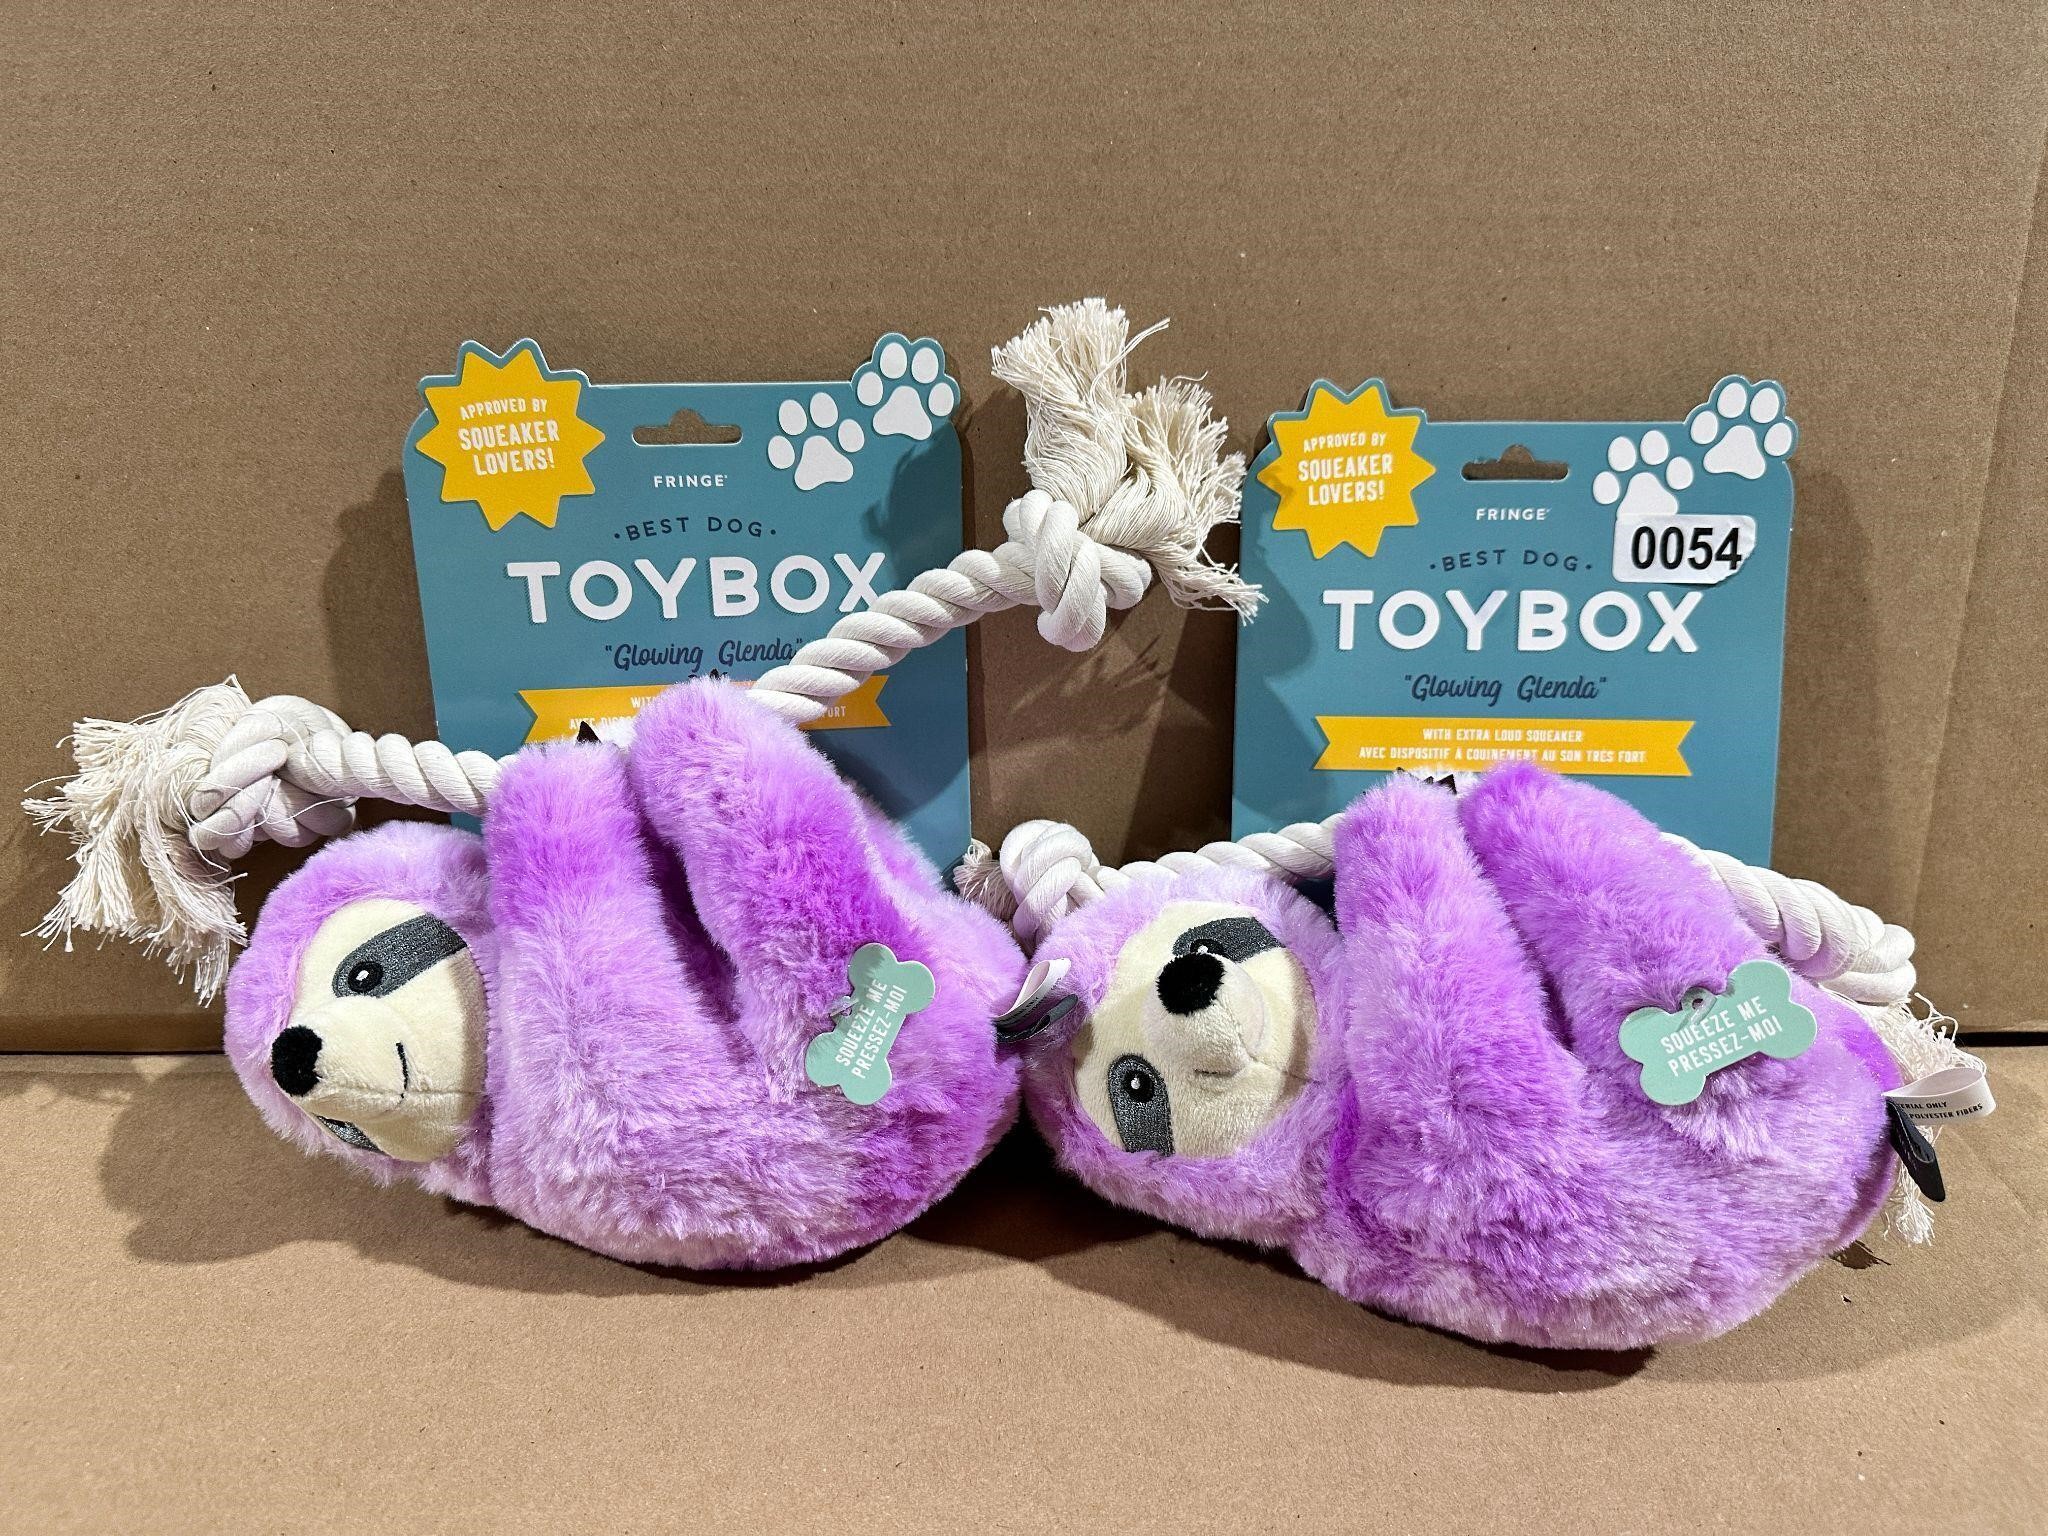 Lot of 2 new toybox sloth dog toys msrp $13 each